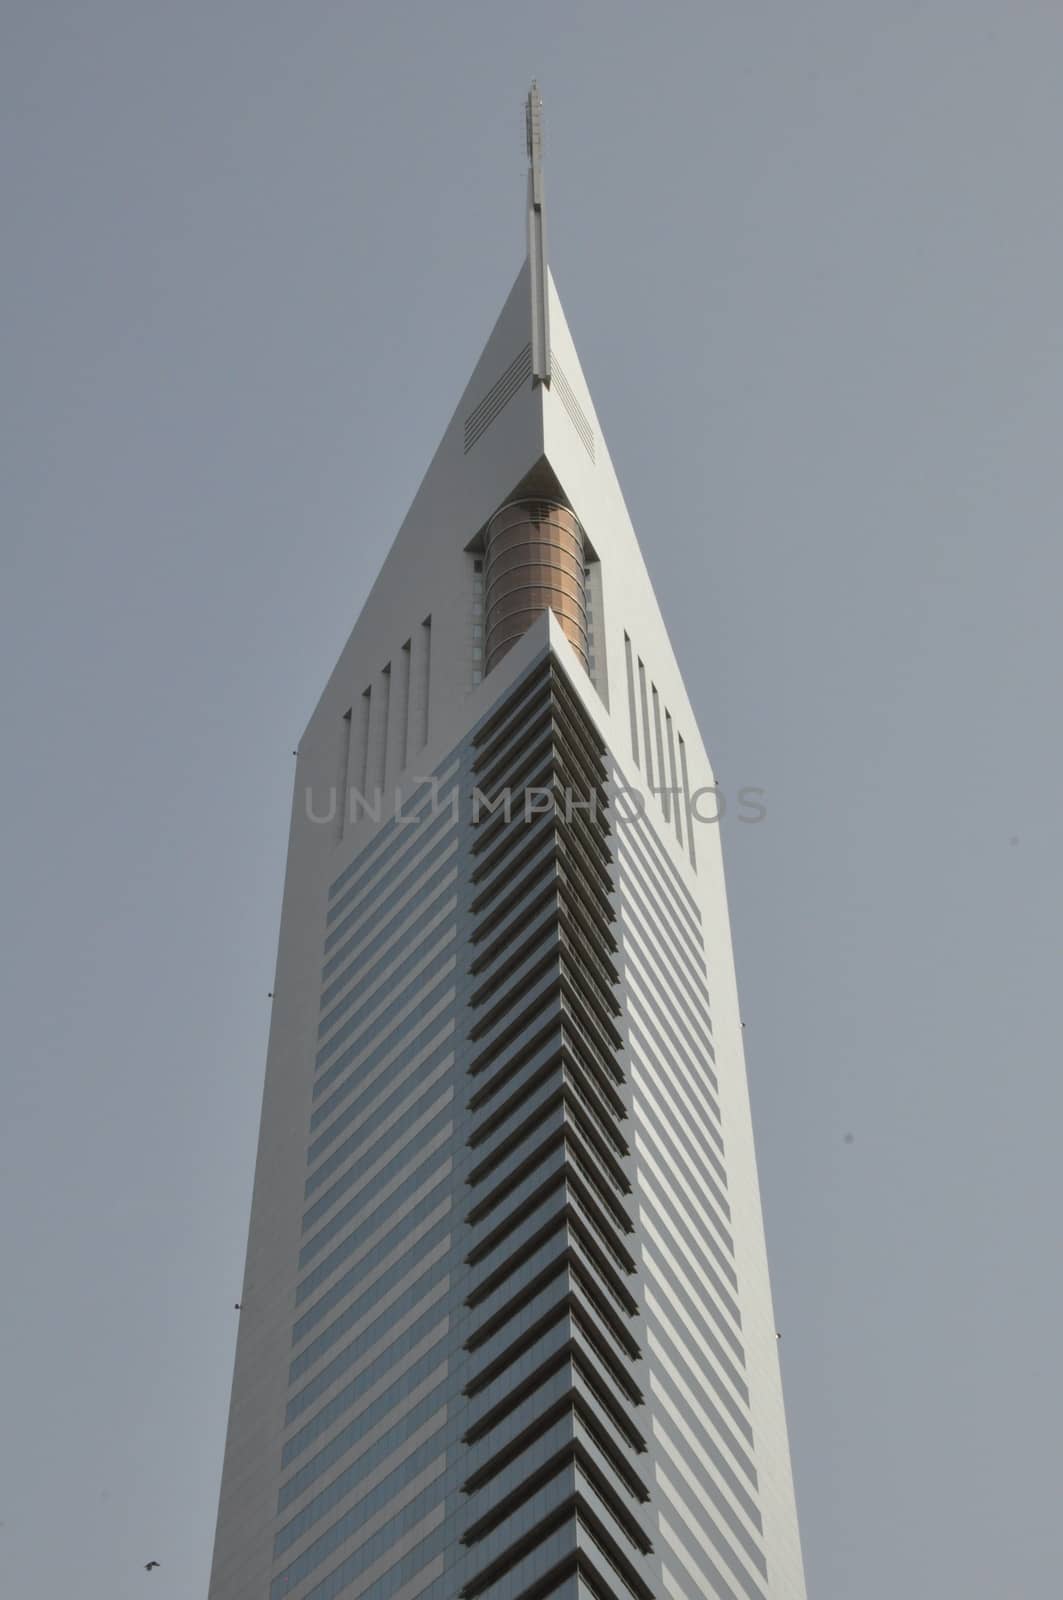 Emirates Towers in Dubai, United Arab Emirates (UAE). The complex contains the Emirates Office Tower and Jumeirah Emirates Towers Hotel, rising to 355 m and 309 m, respectively.